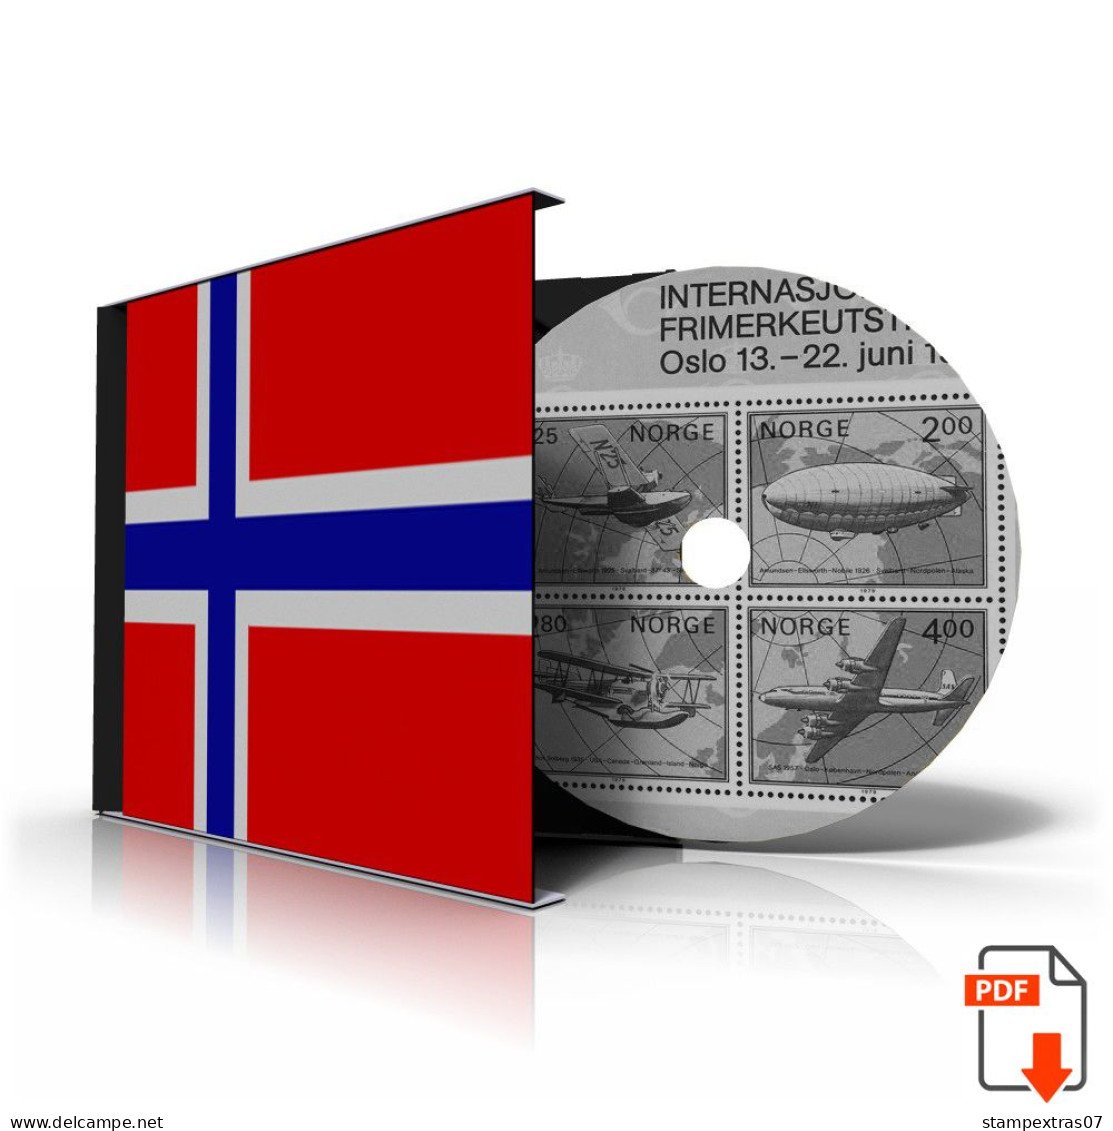 NORWAY 1855-2010 STAMP ALBUM PAGES (183 B&w Illustrated Pages) - English